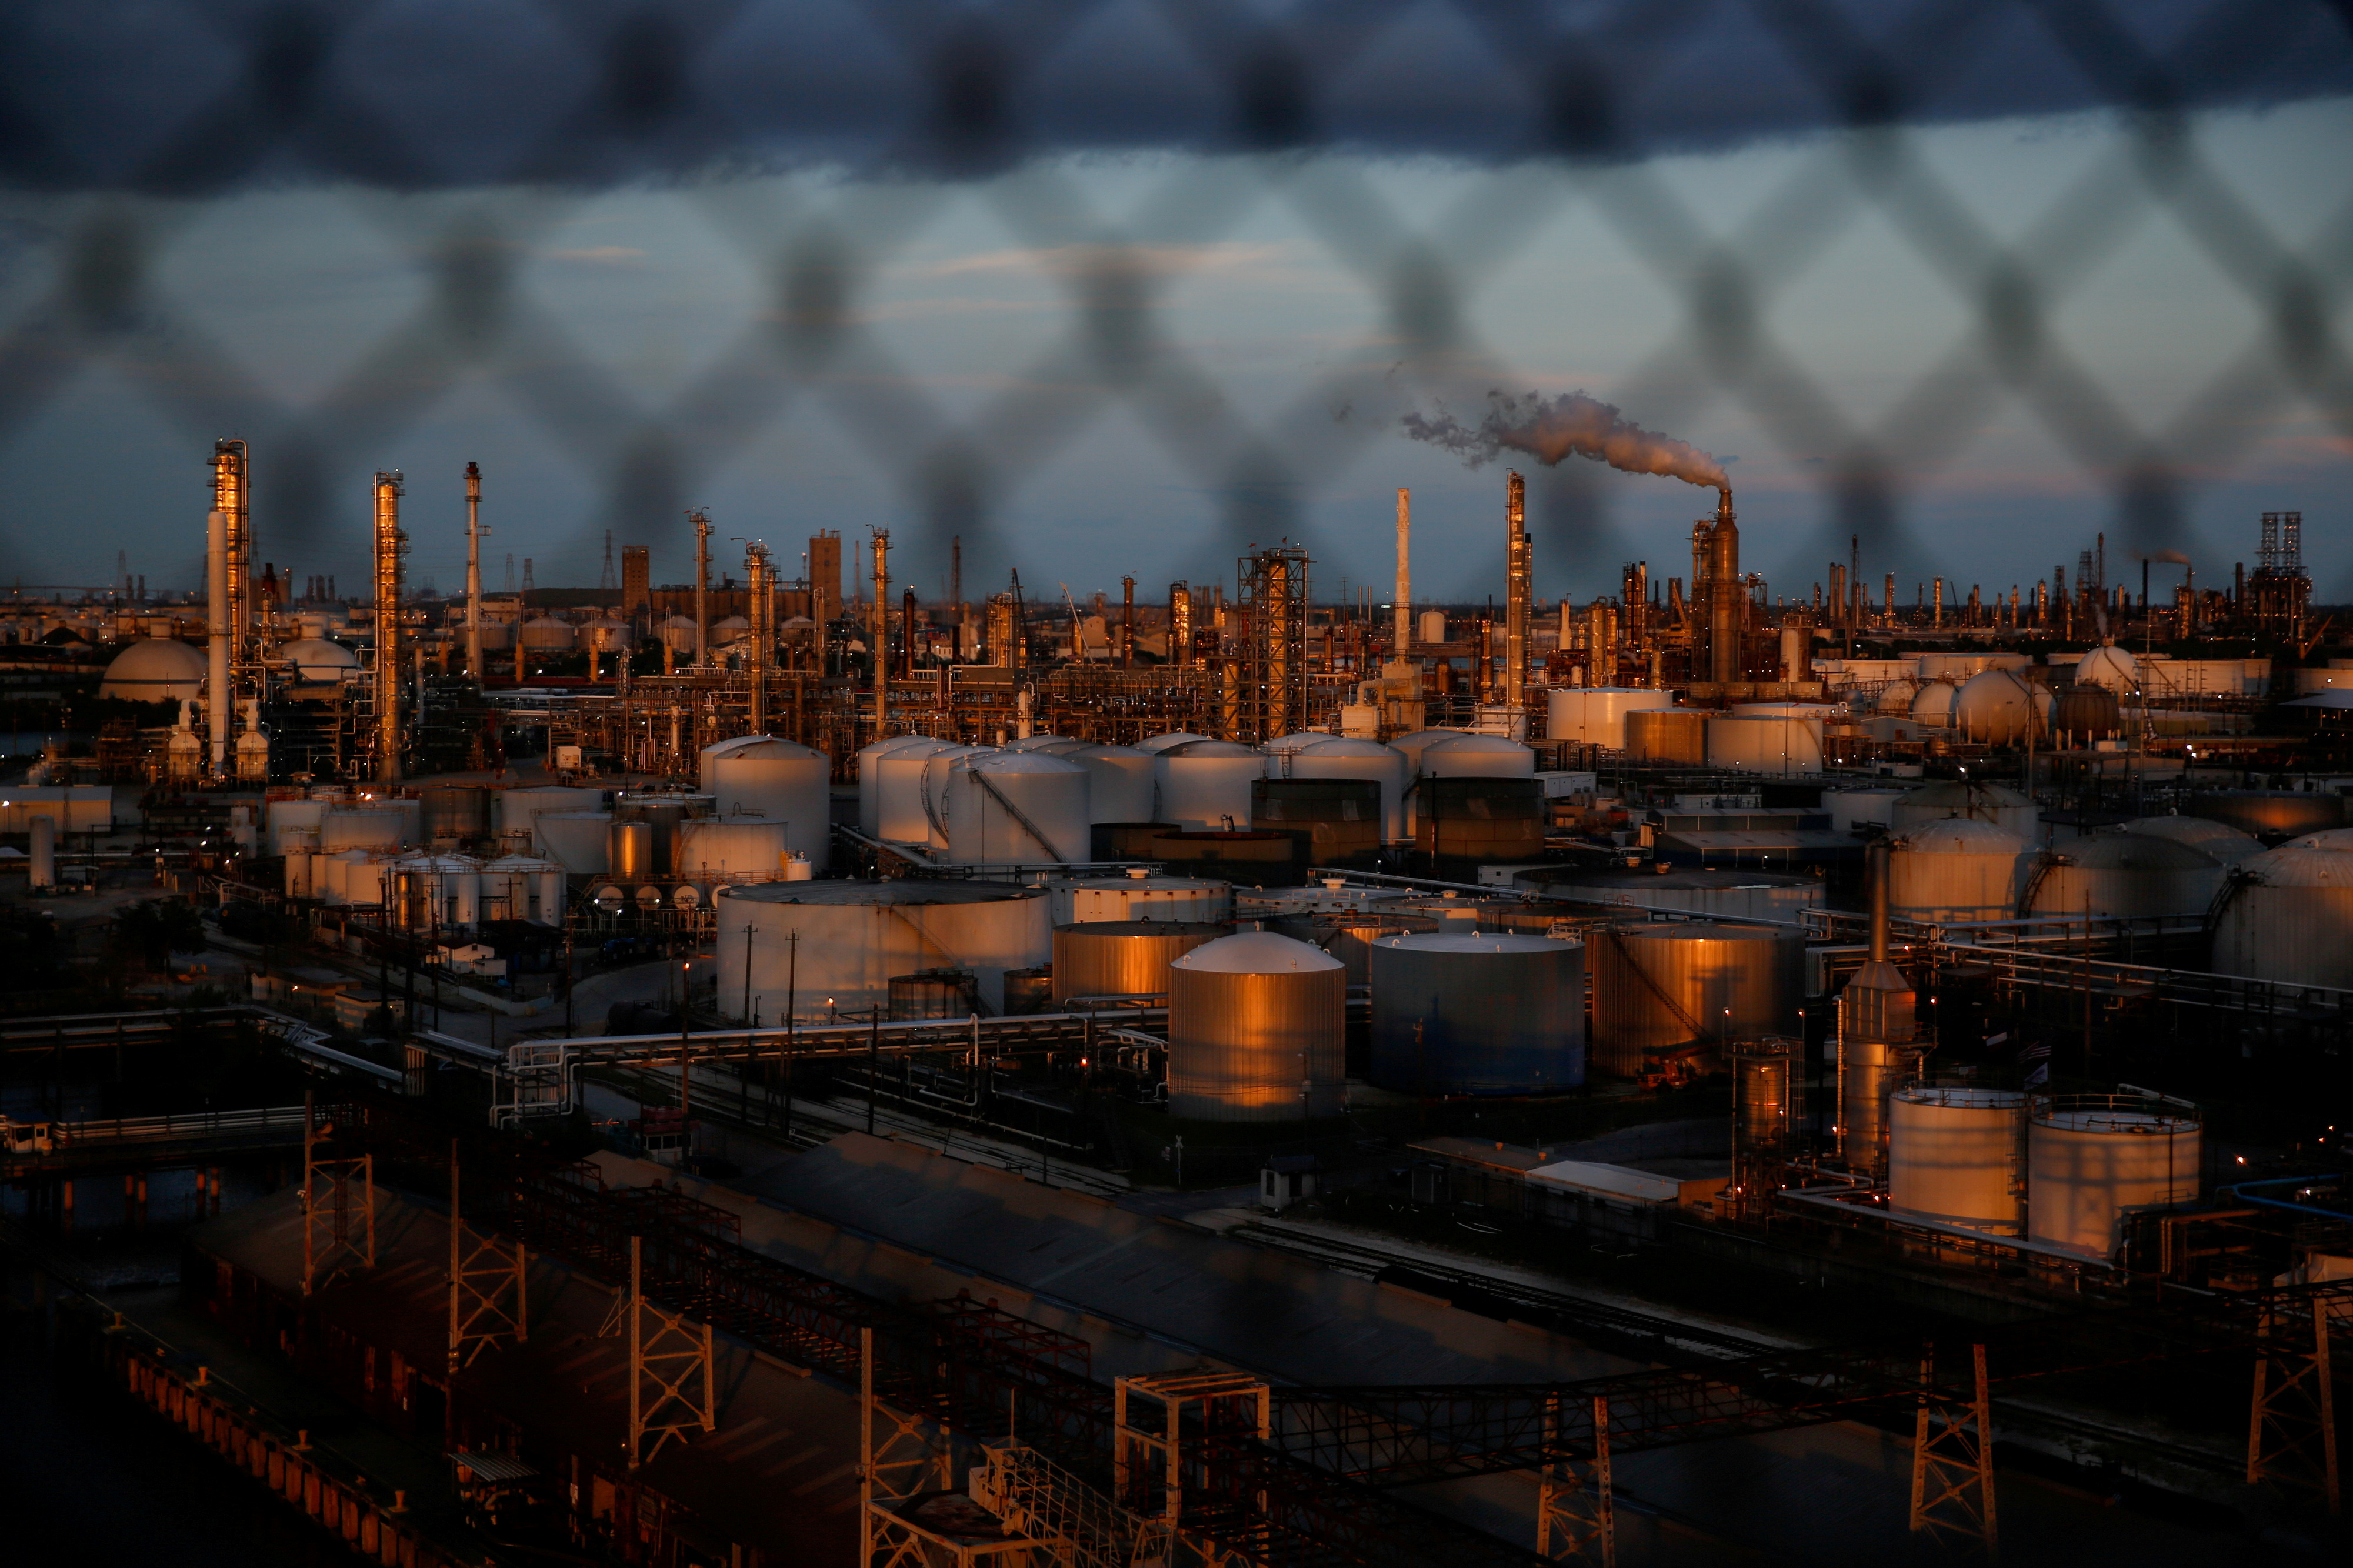 Chemical plants and refineries near the Houston Ship Channel are seen in Houston